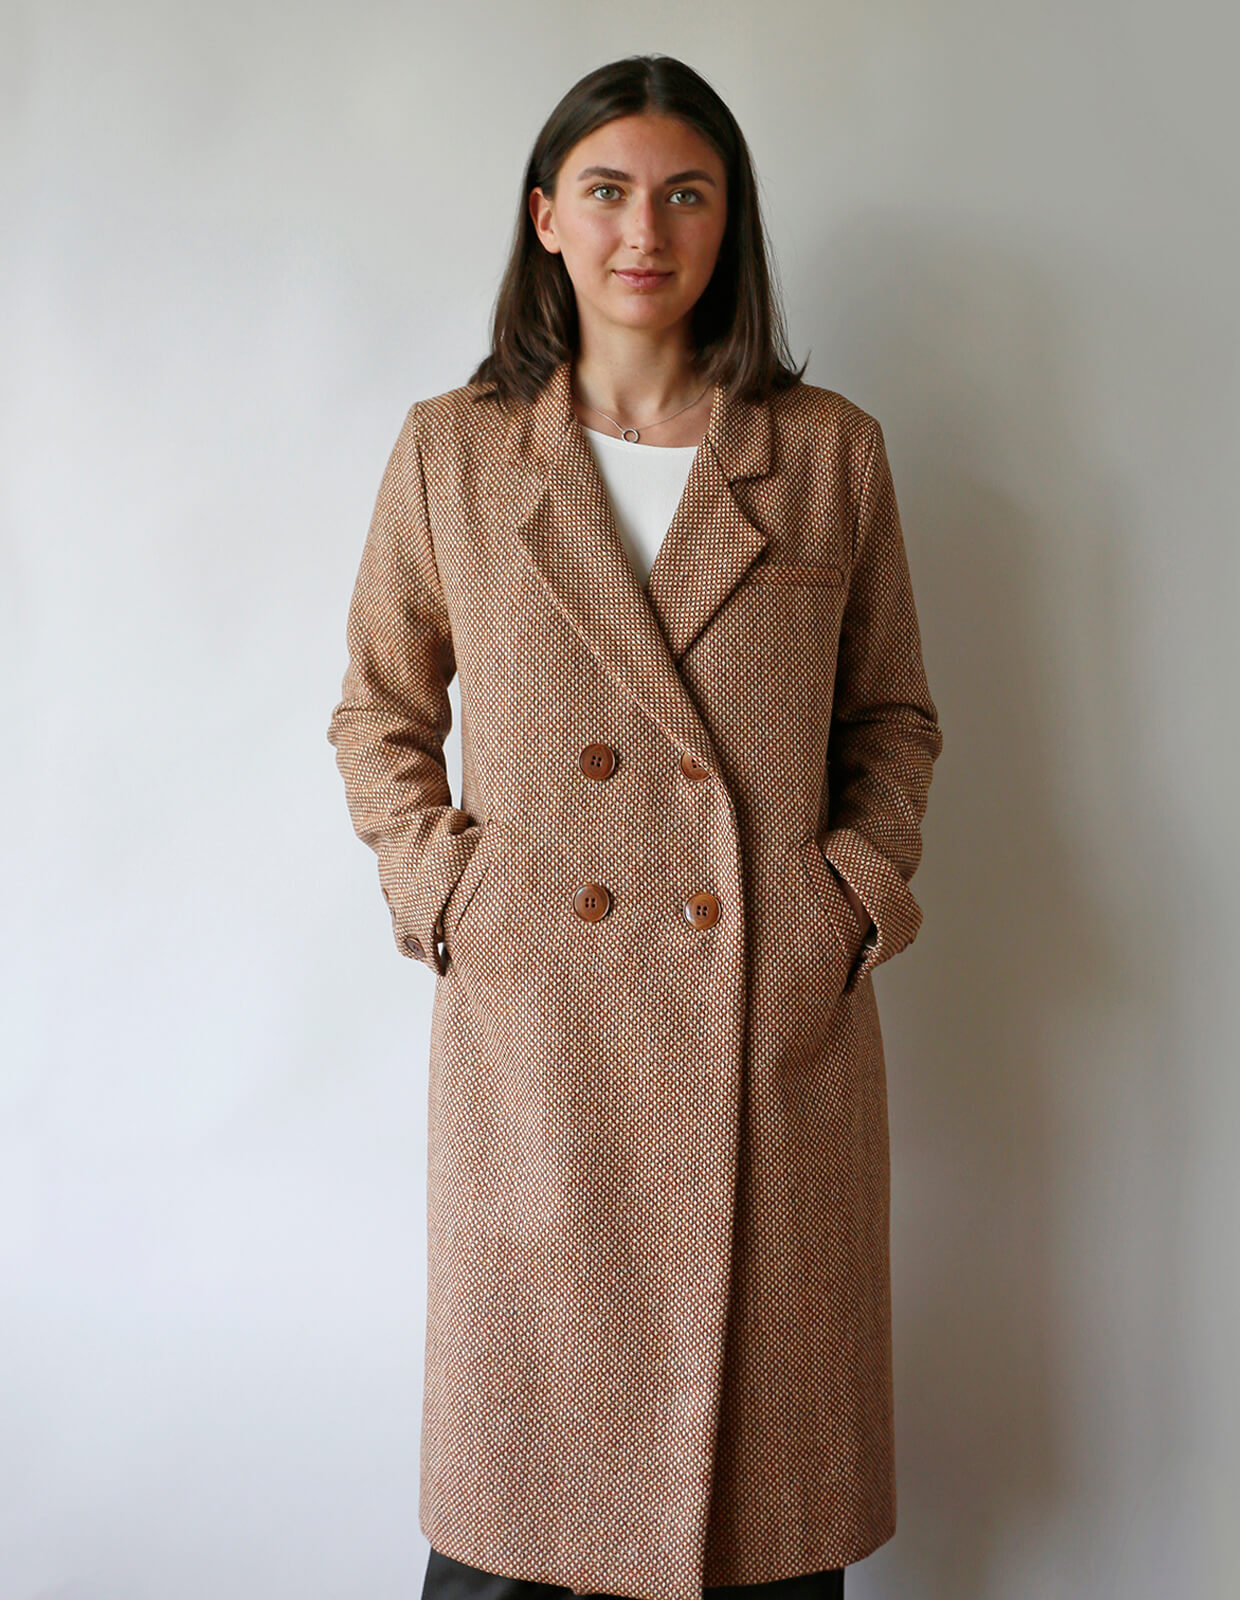 The classic coat by The Makers Atelier